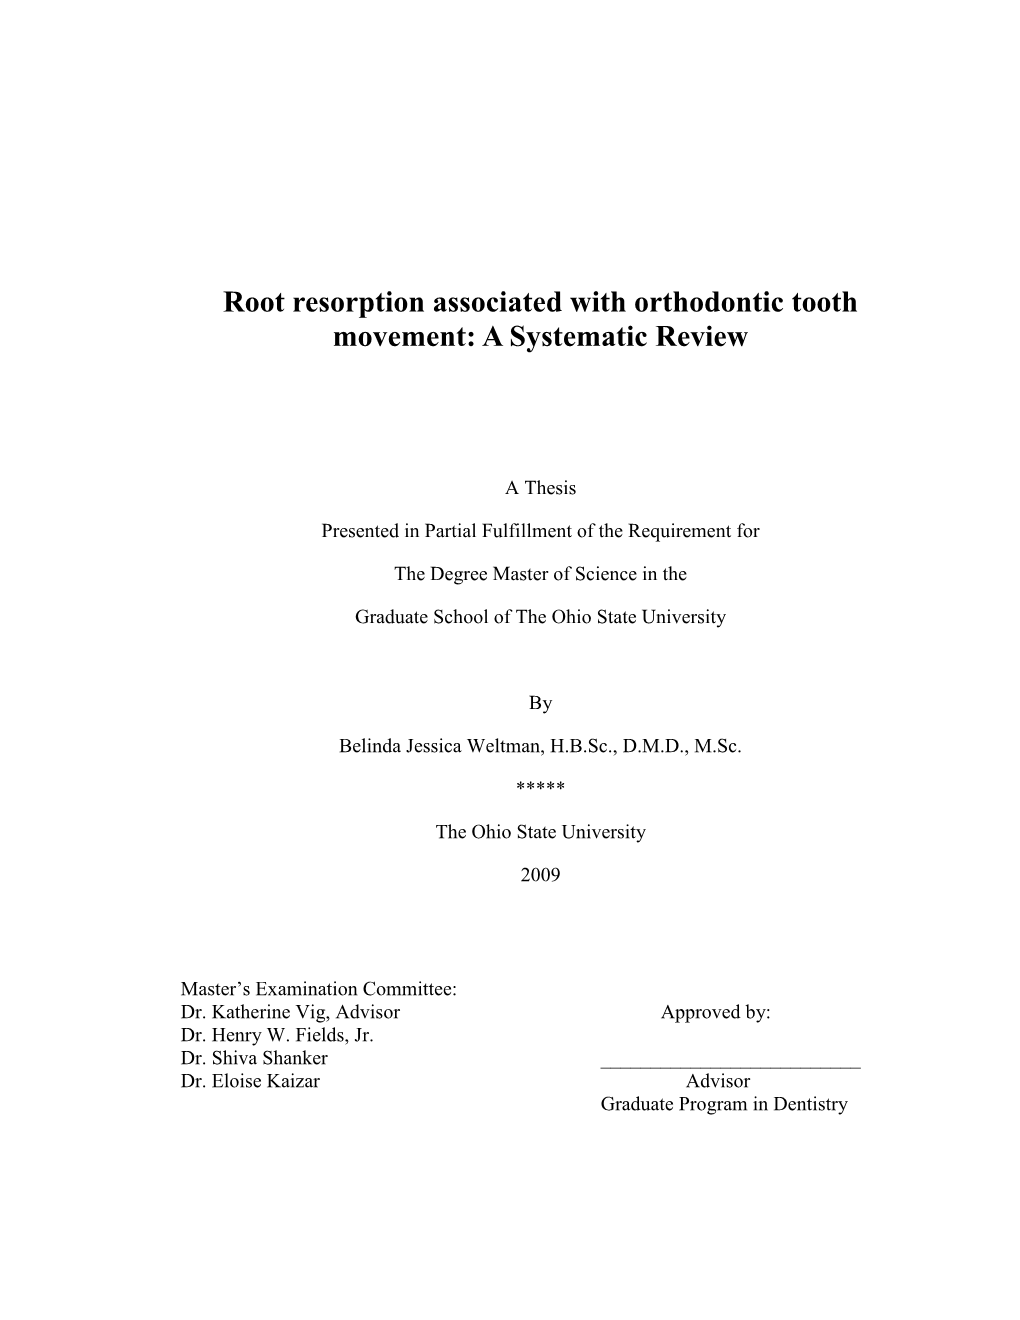 Root Resorption Associated with Orthodontic Tooth Movement: a Systematic Review